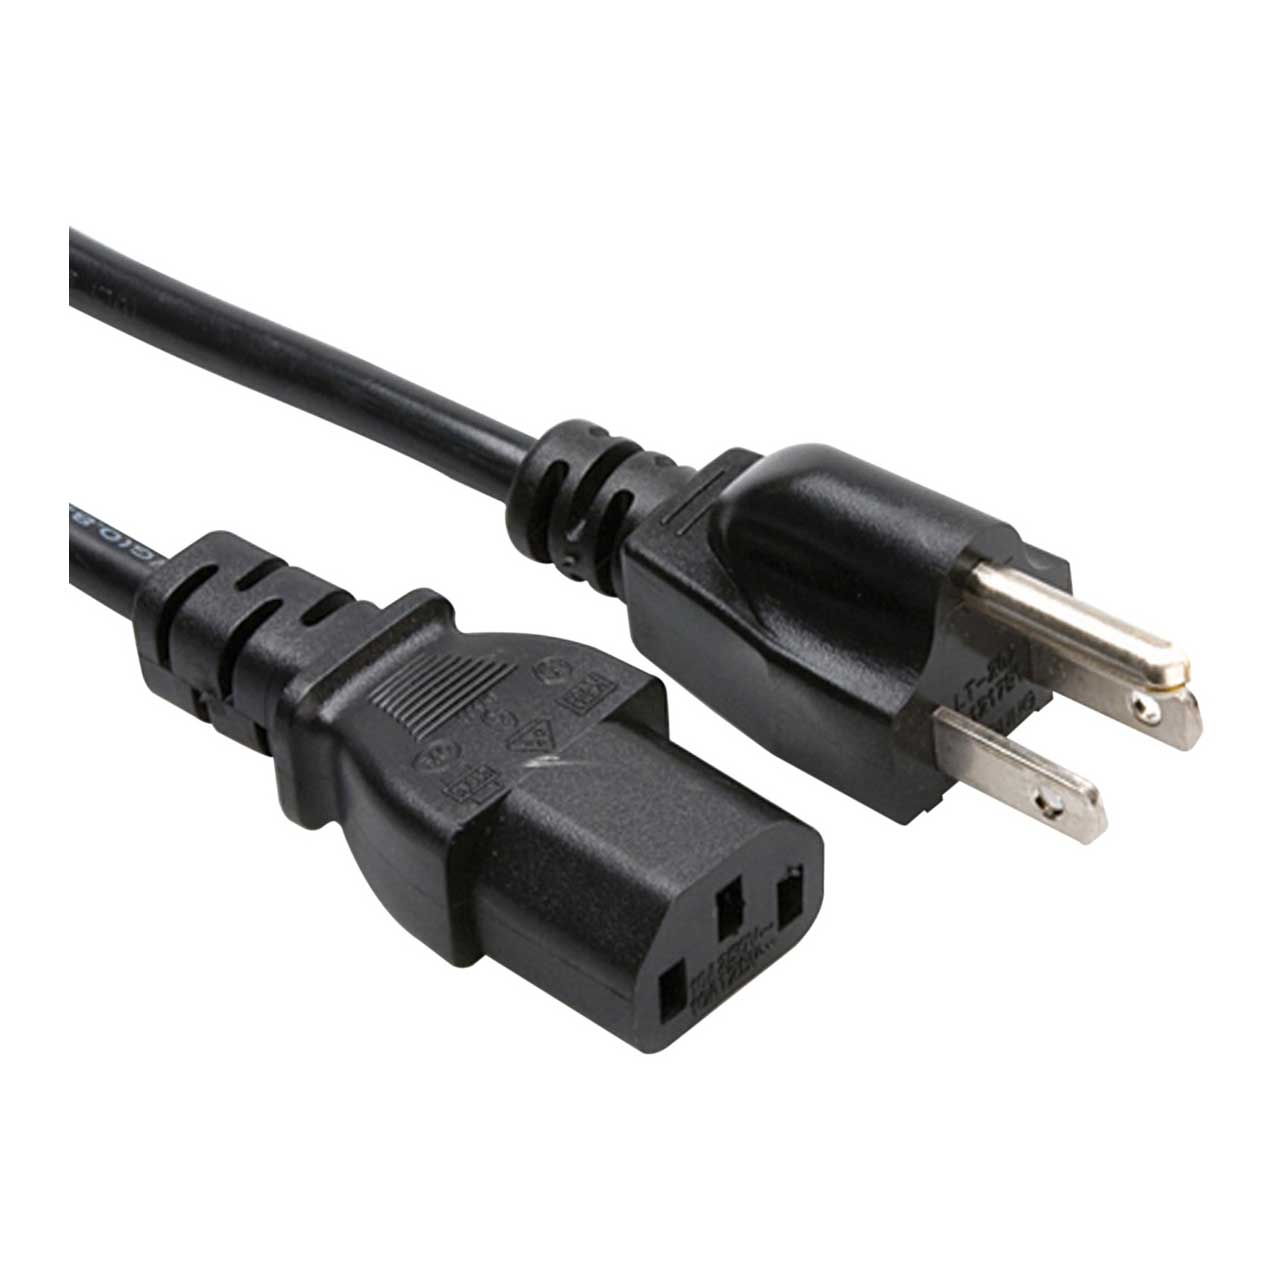 STORITE Power Cord 1.8 m UPort 3 Pin PC Power Cable IEC Mains